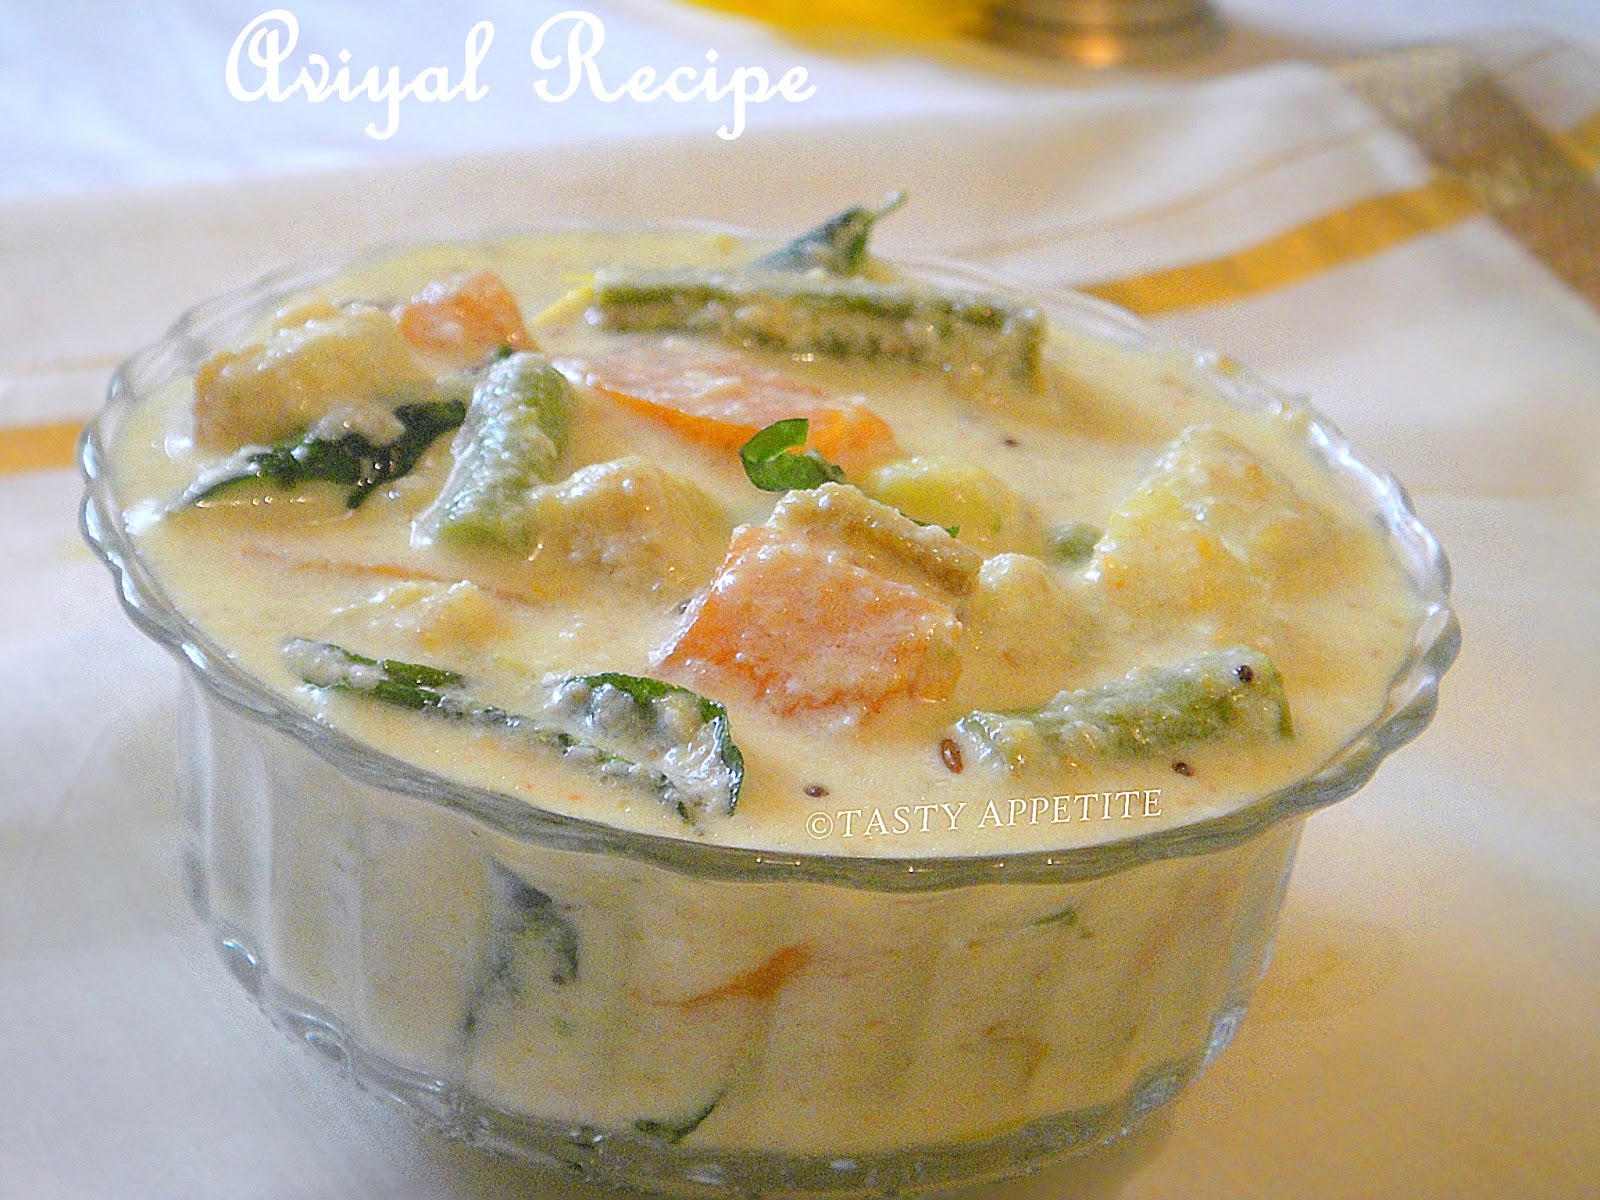 How to make Aviyal /South Indian Avial Recipe / Step-by-Step: